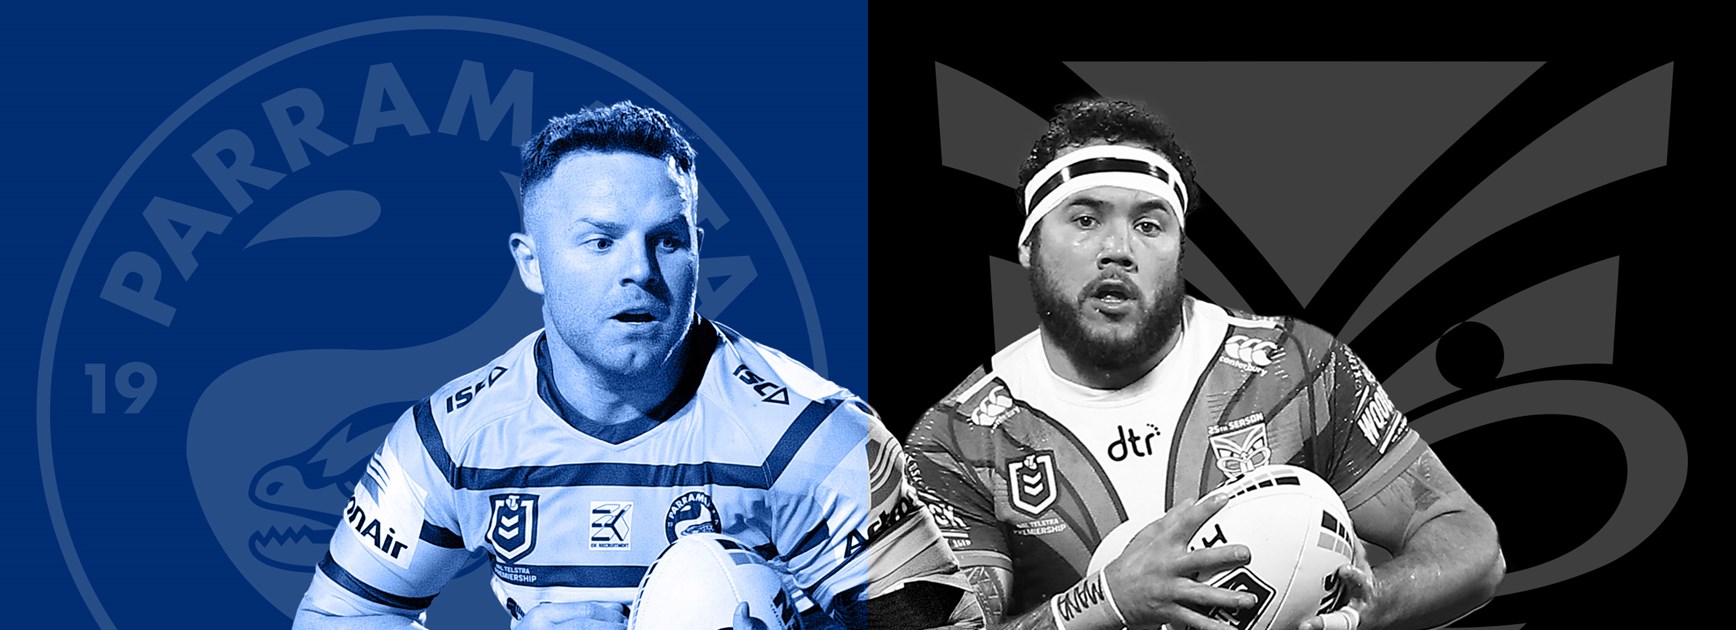 Eels v Warriors, Round 19 Match Preview